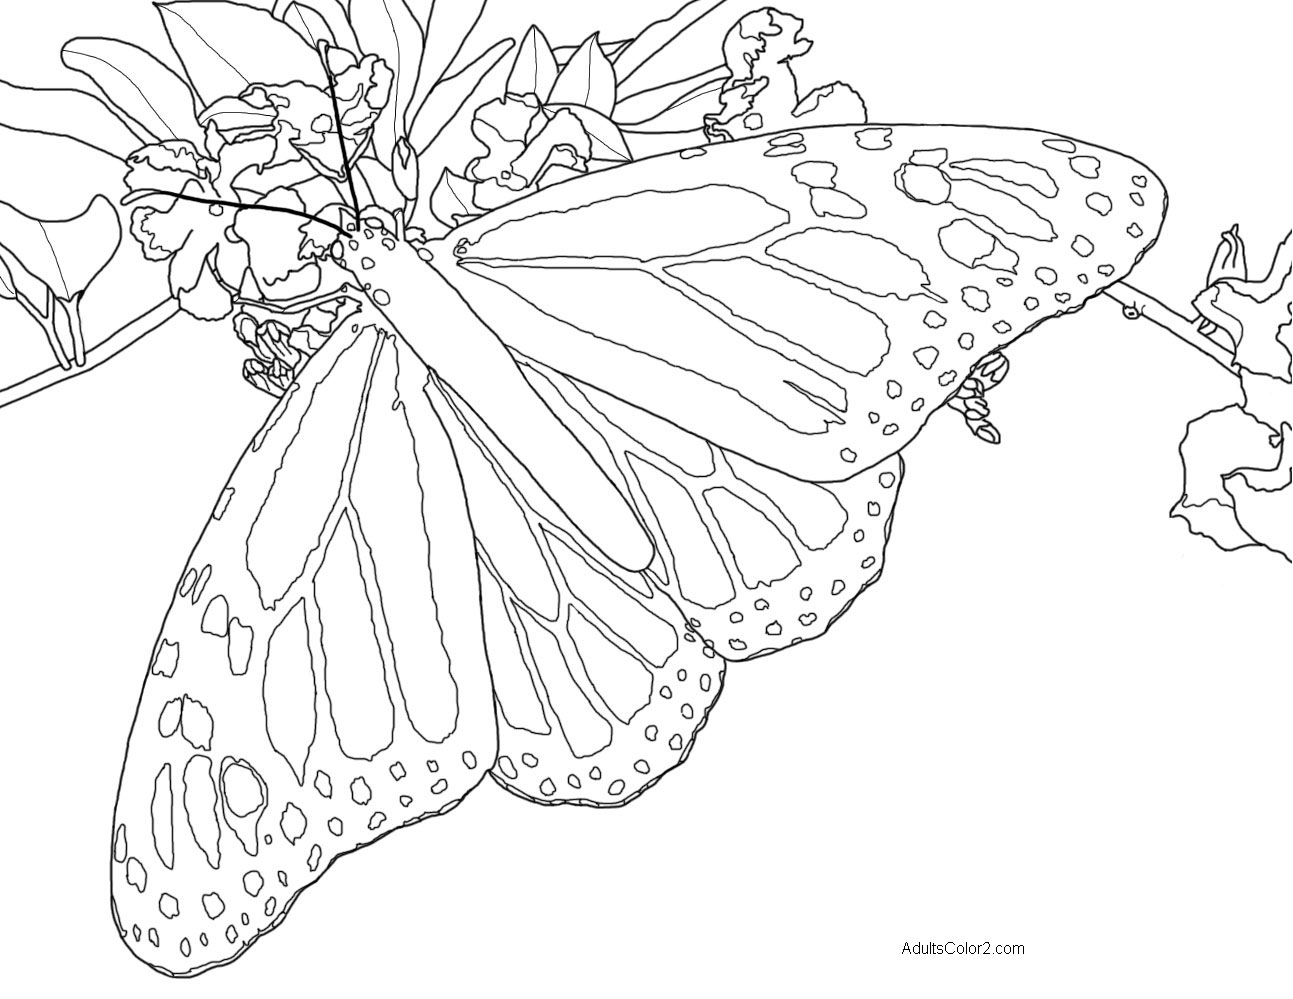 Butterfly coloring pages airborne art